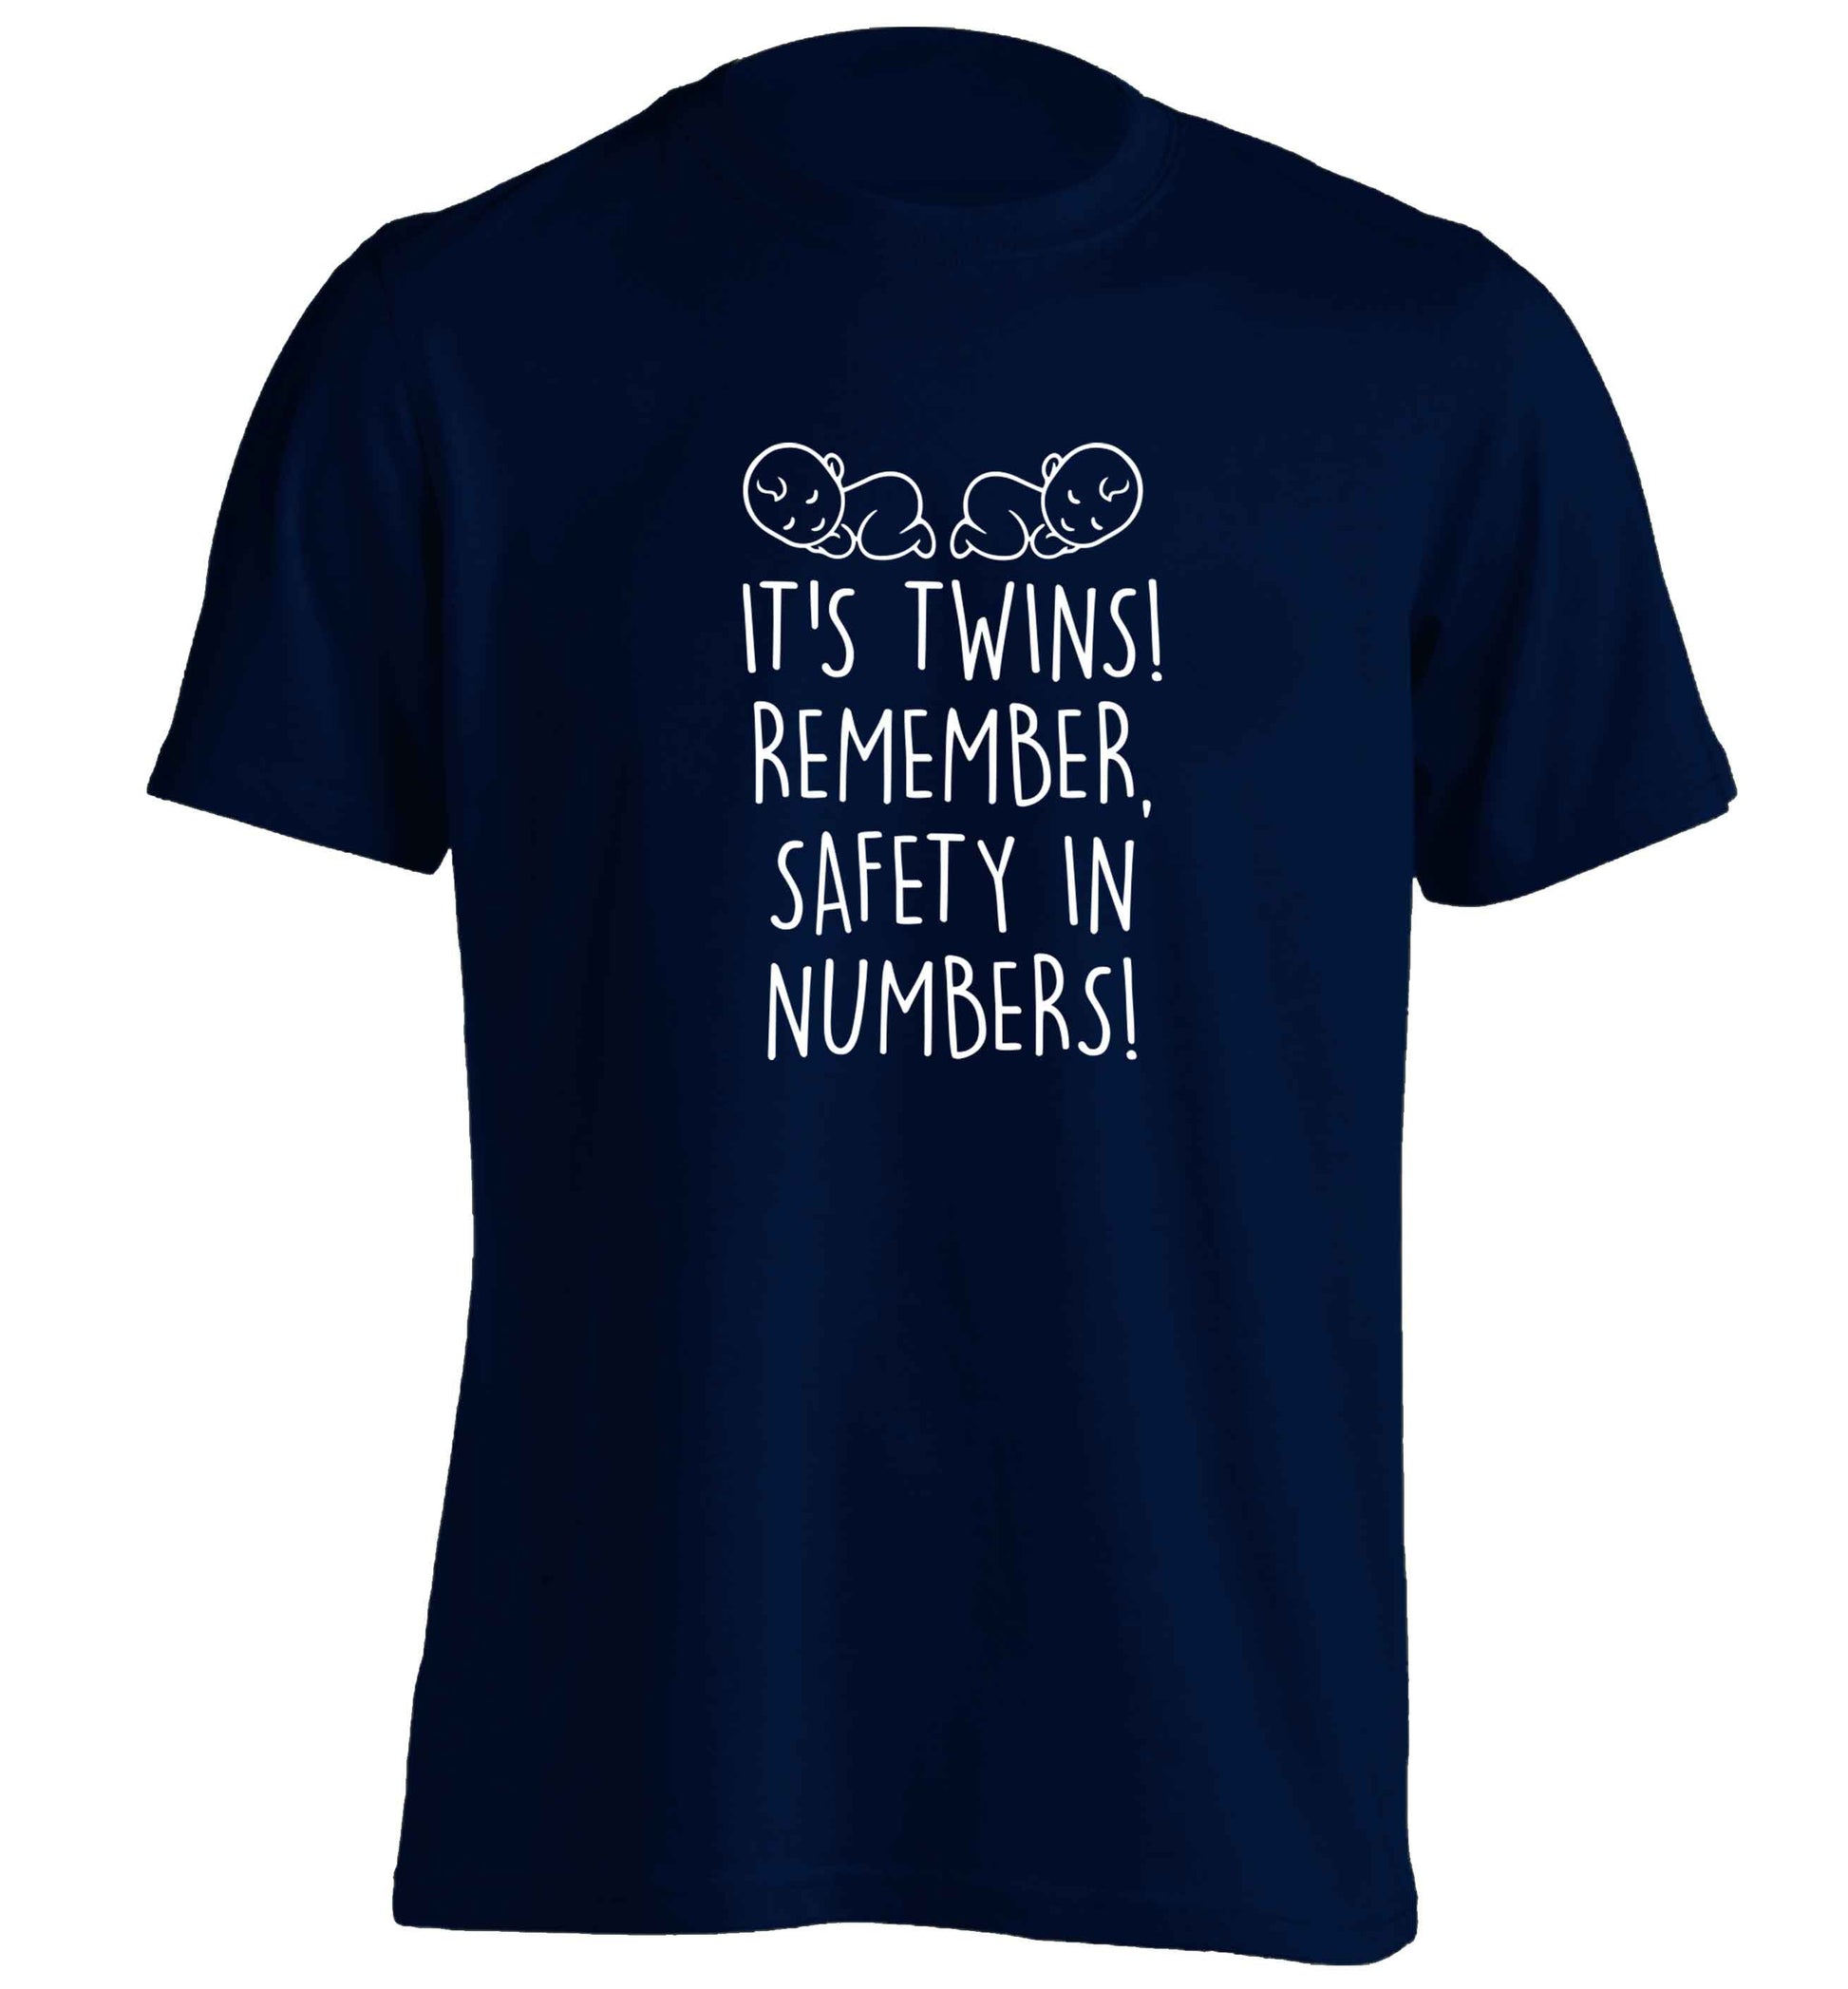 It's twins! Remember safety in numbers! adults unisex navy Tshirt 2XL